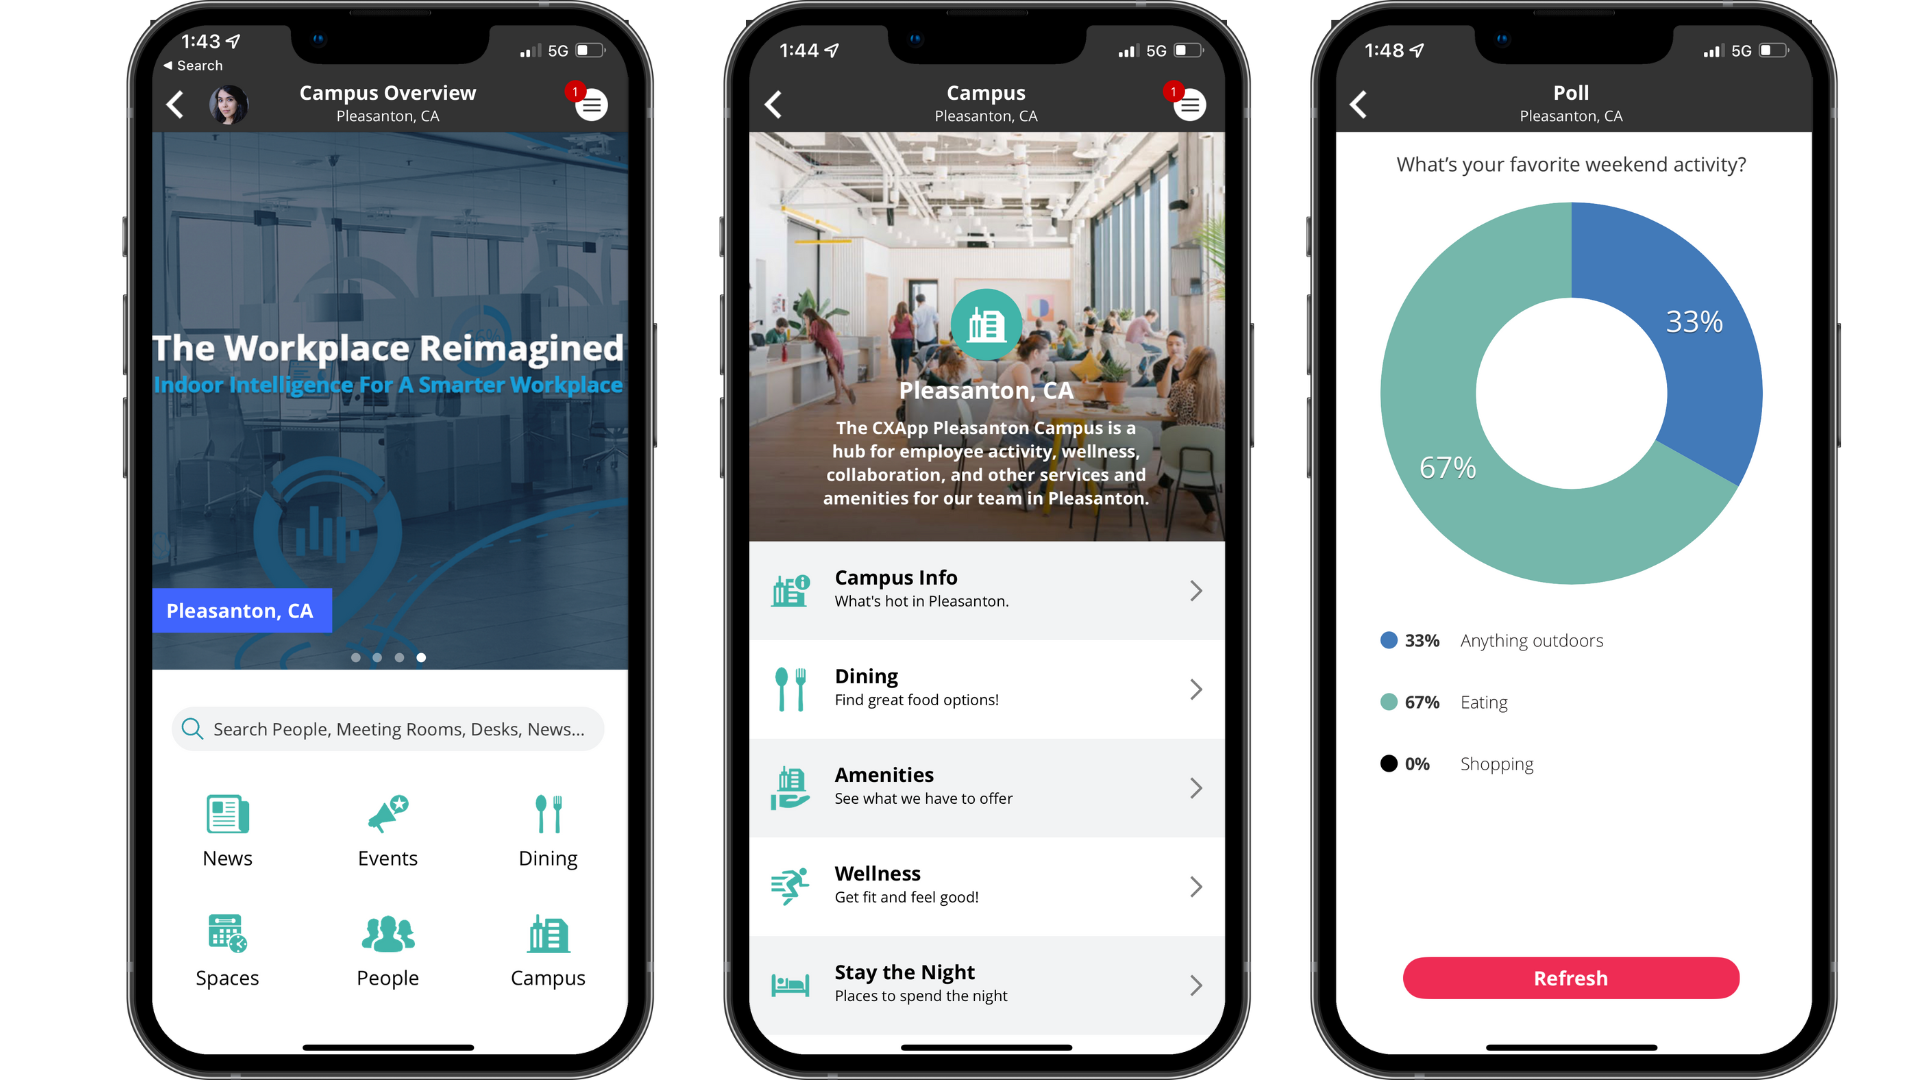 The Overview and Campus screens in Inpixon's workplace experience app provide centralized access to organizational news, events, amenities, and more. The Poll screen allows employees to see how colleagues are voting on an issue or question. 